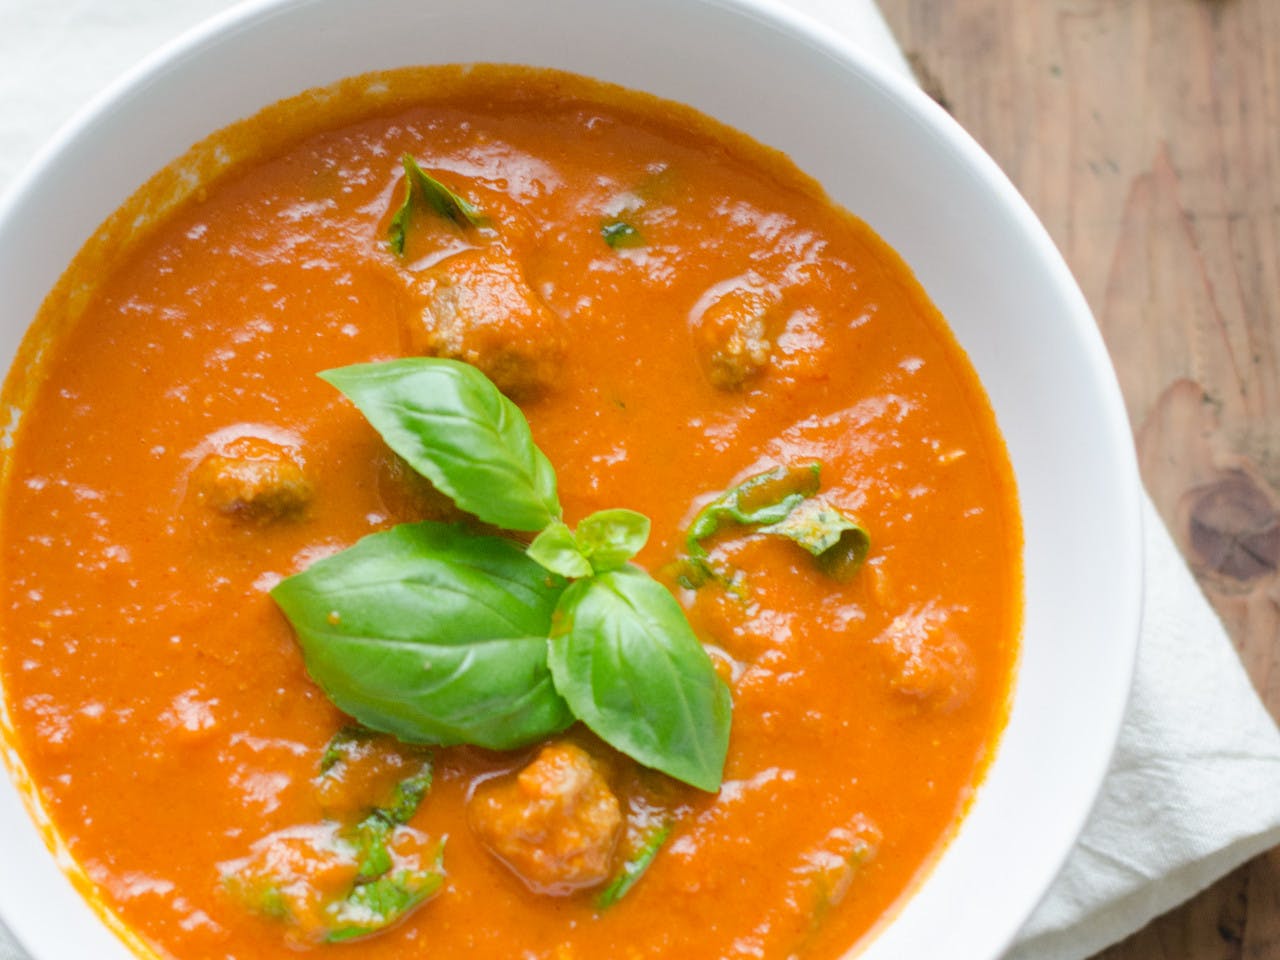 Tomato and basil soup with beef meatballs